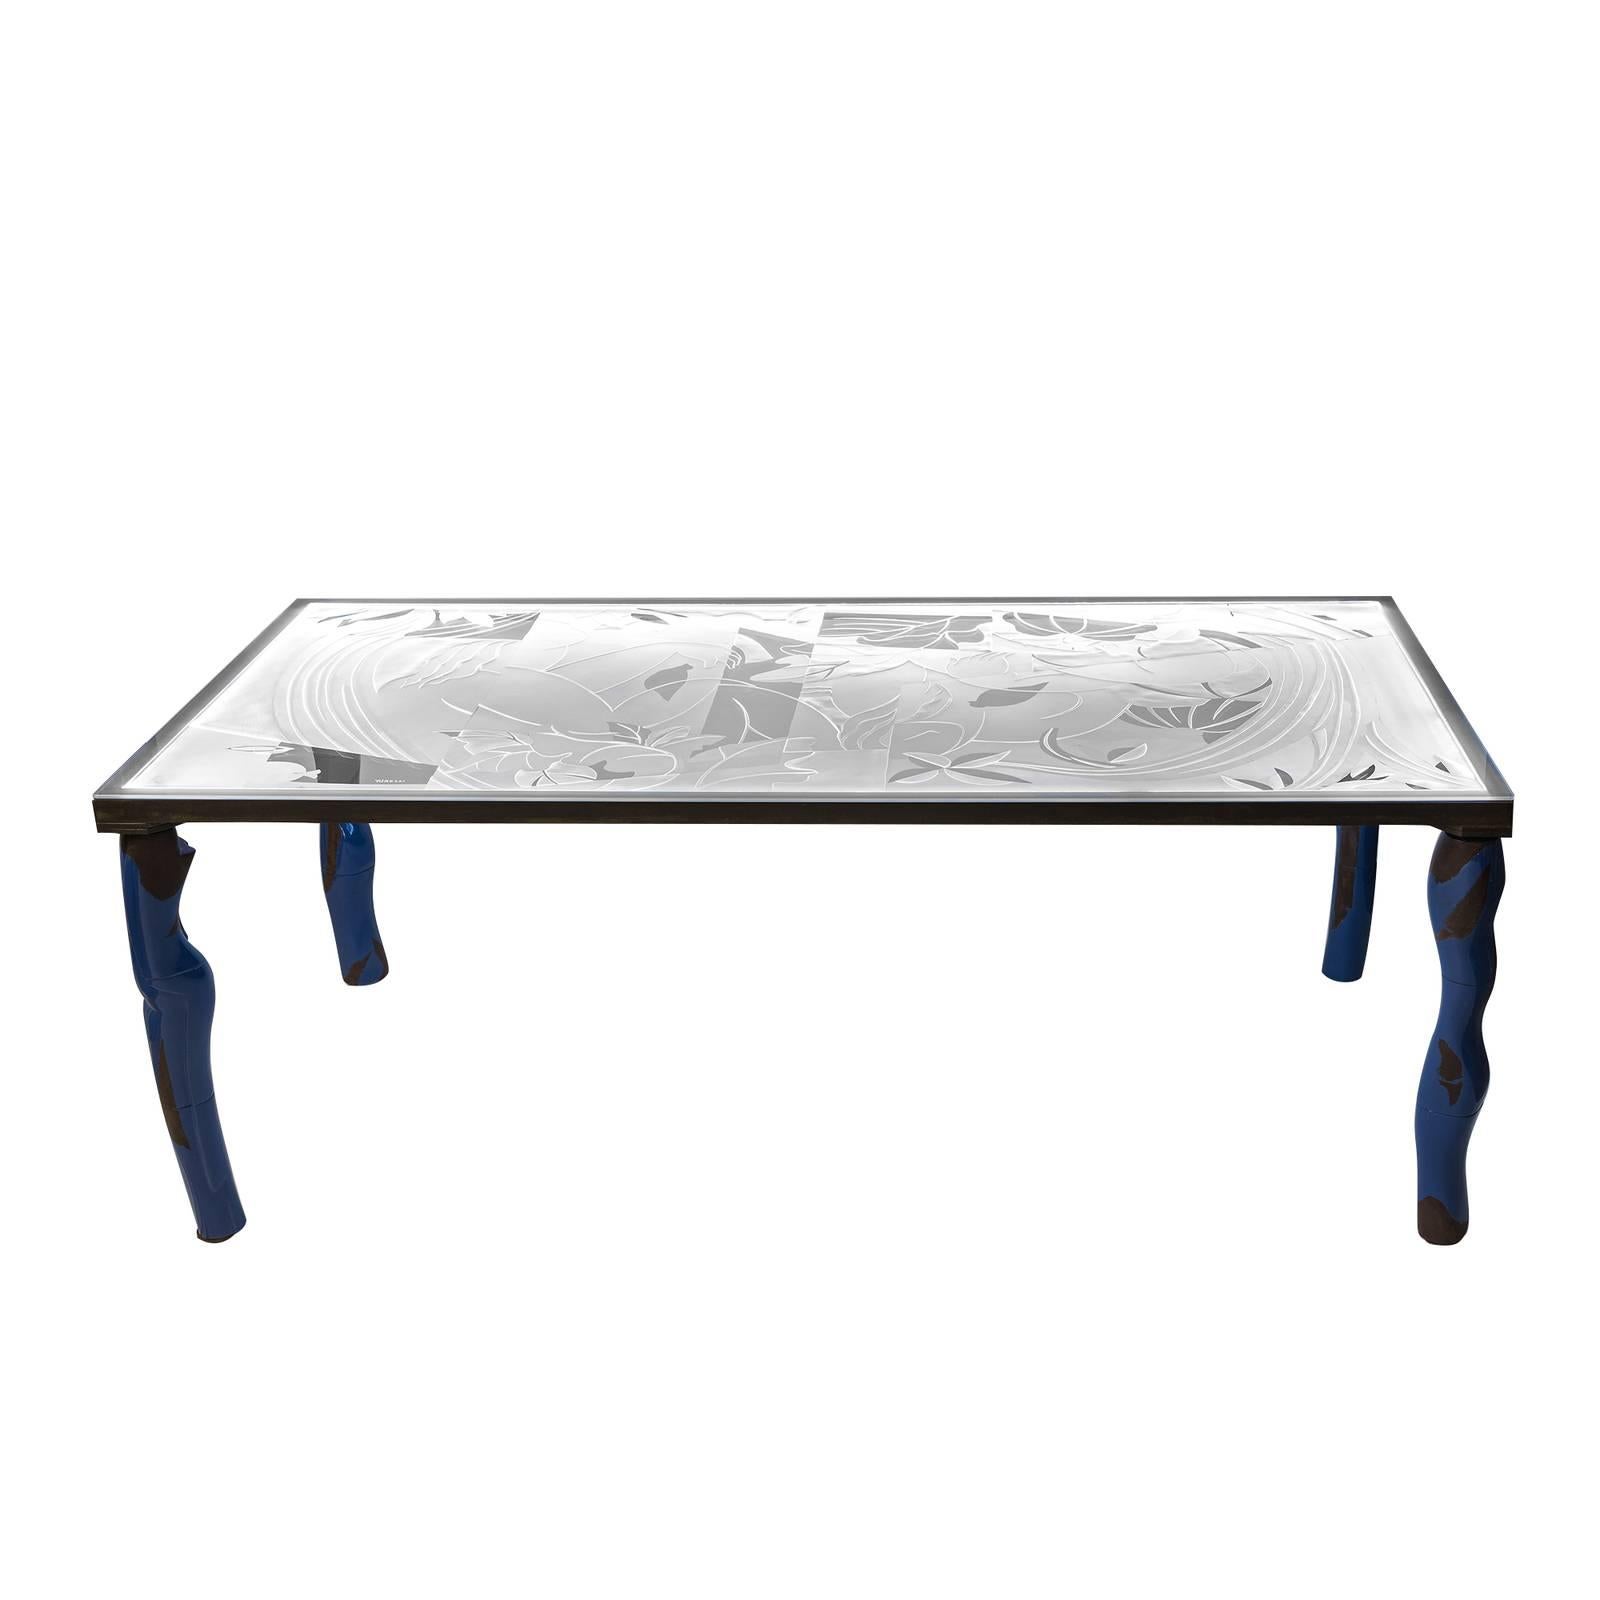 An impressive showcase of three-dimensional workmanship and innovative design, this avant-garde table is a sophisticated addition to any modern dining room. This piece boasts an ethereal frame with a rim in coated iron and sculptural legs in glazed